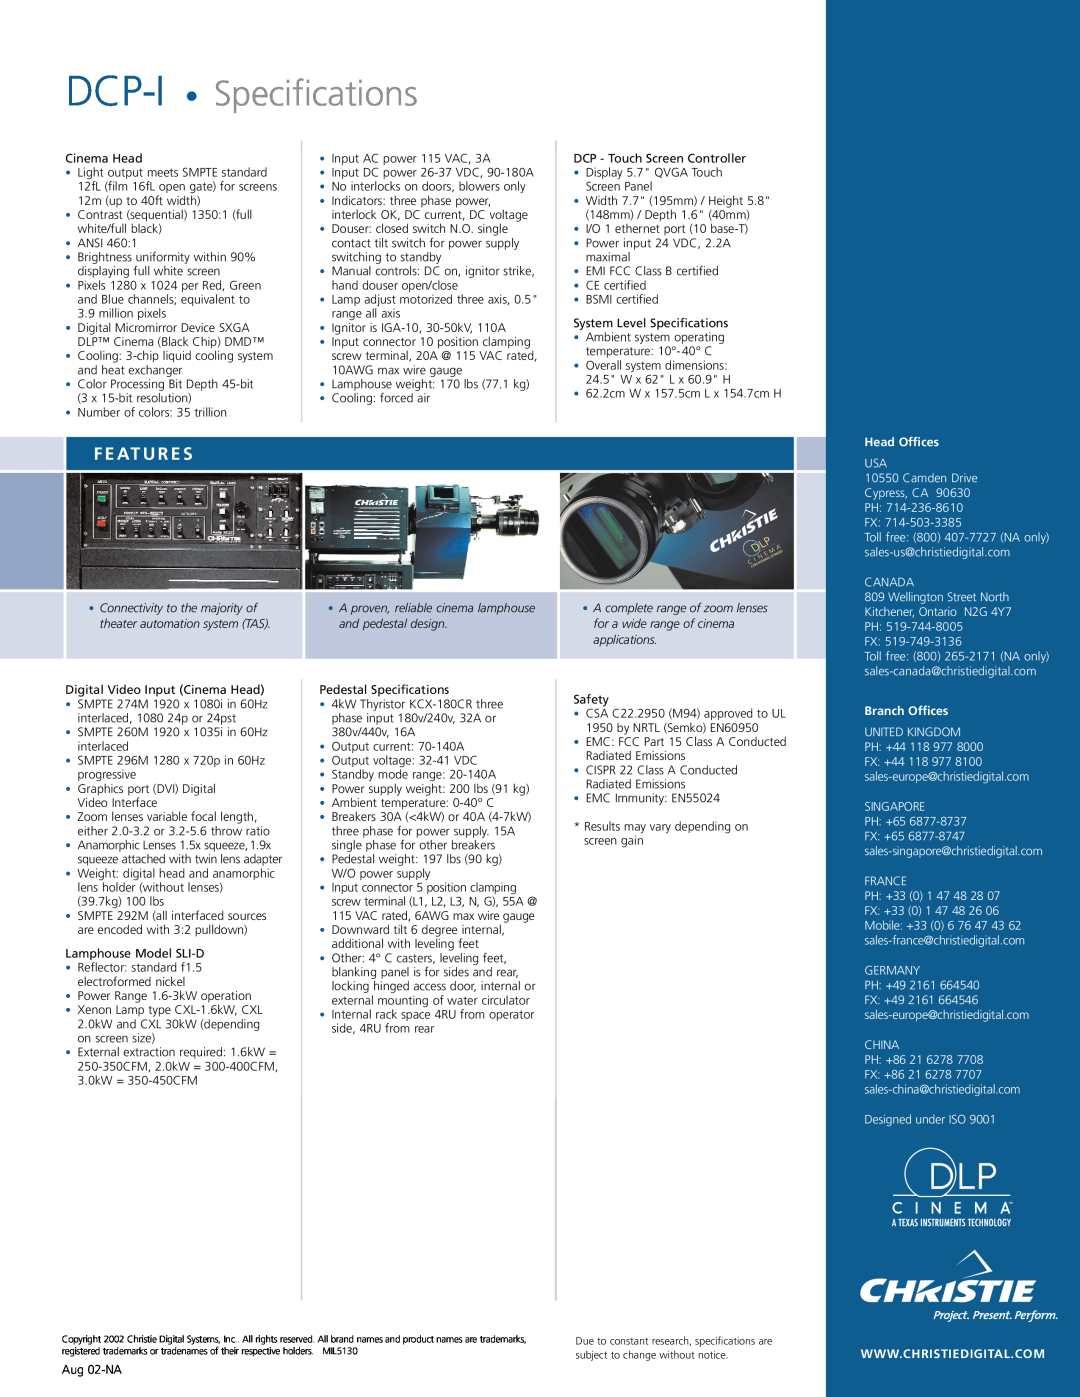 Christie Digital Systems manual F E At U R E S, DCP-I Specifications, Head Offices, Branch Offices 